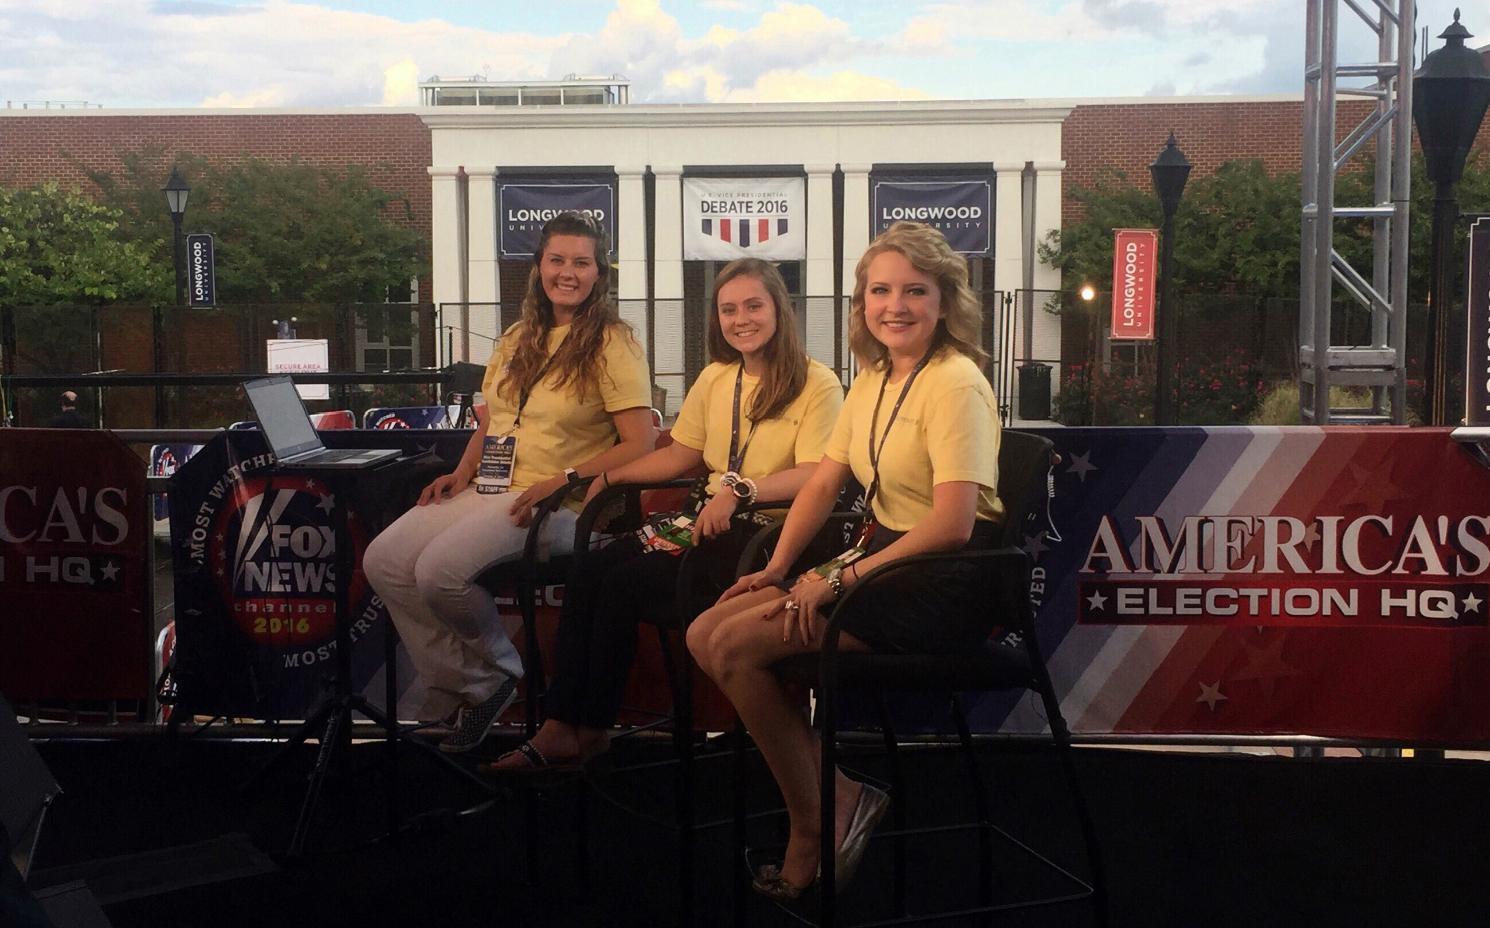 Ryan Carey (left) and Allyson Stone (right) volunteered with Fox News during the 2016 Vice Presidential Debate at Longwood. The pair will work with Fox again during this February’s Super Bowl in Houston.